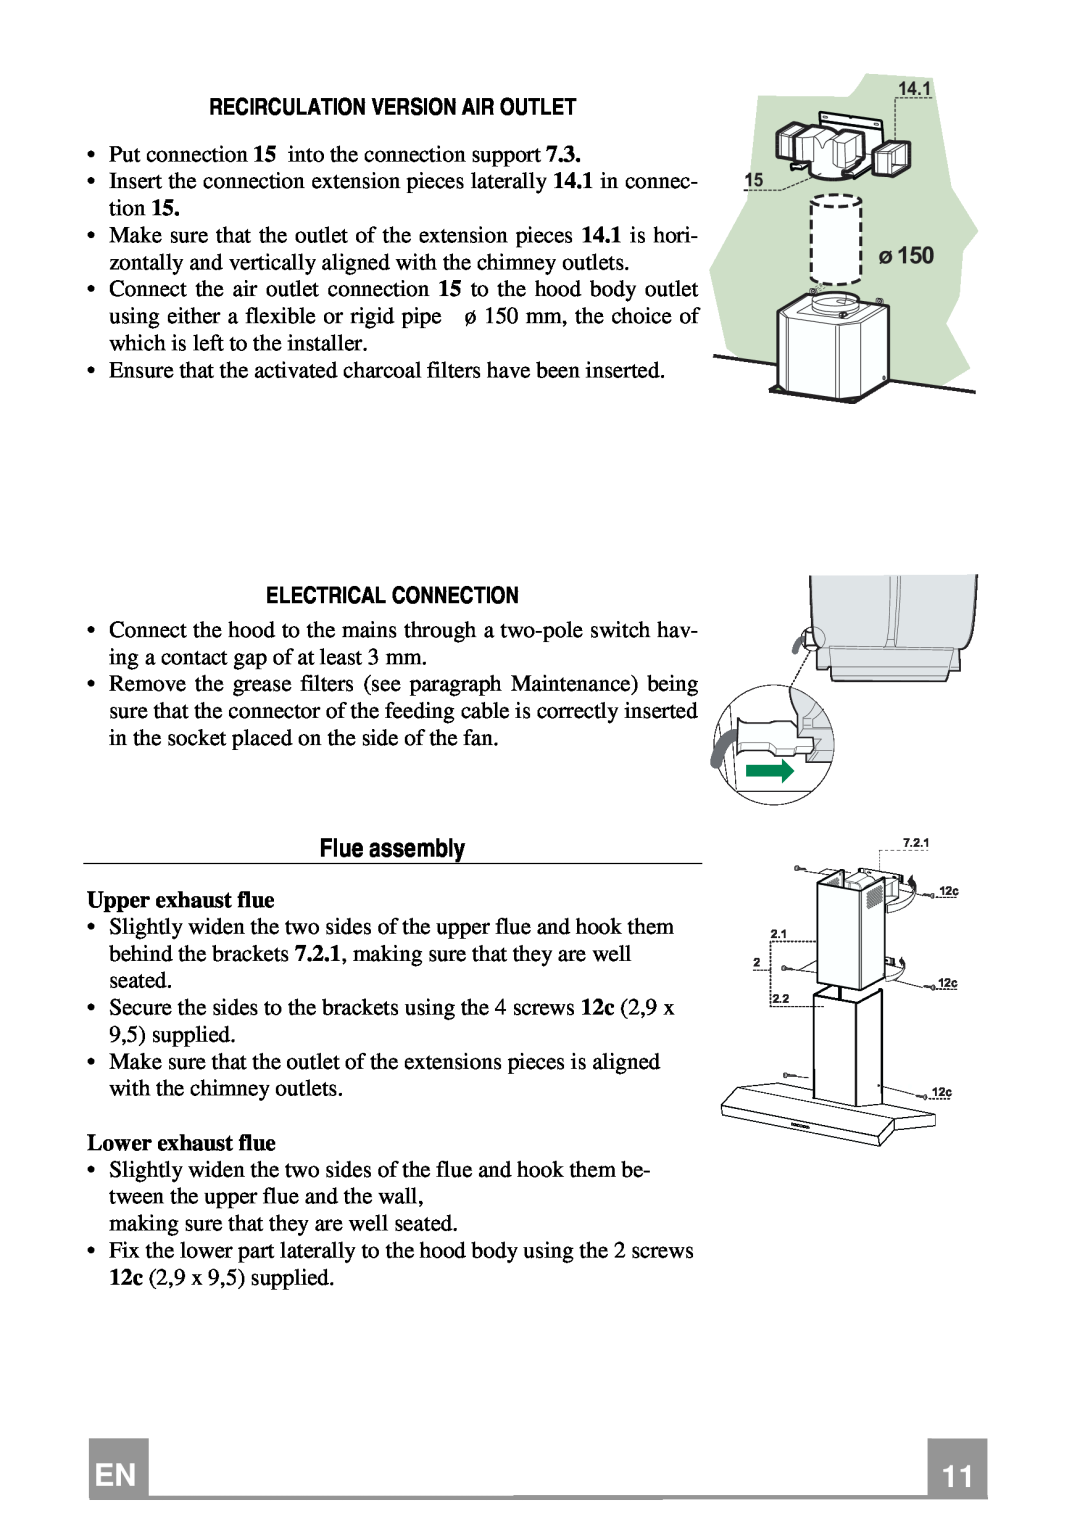 Franke Consumer Products FCH 906 XS ECS manual Flue assembly, Recirculation Version Air Outlet, Electrical Connection 